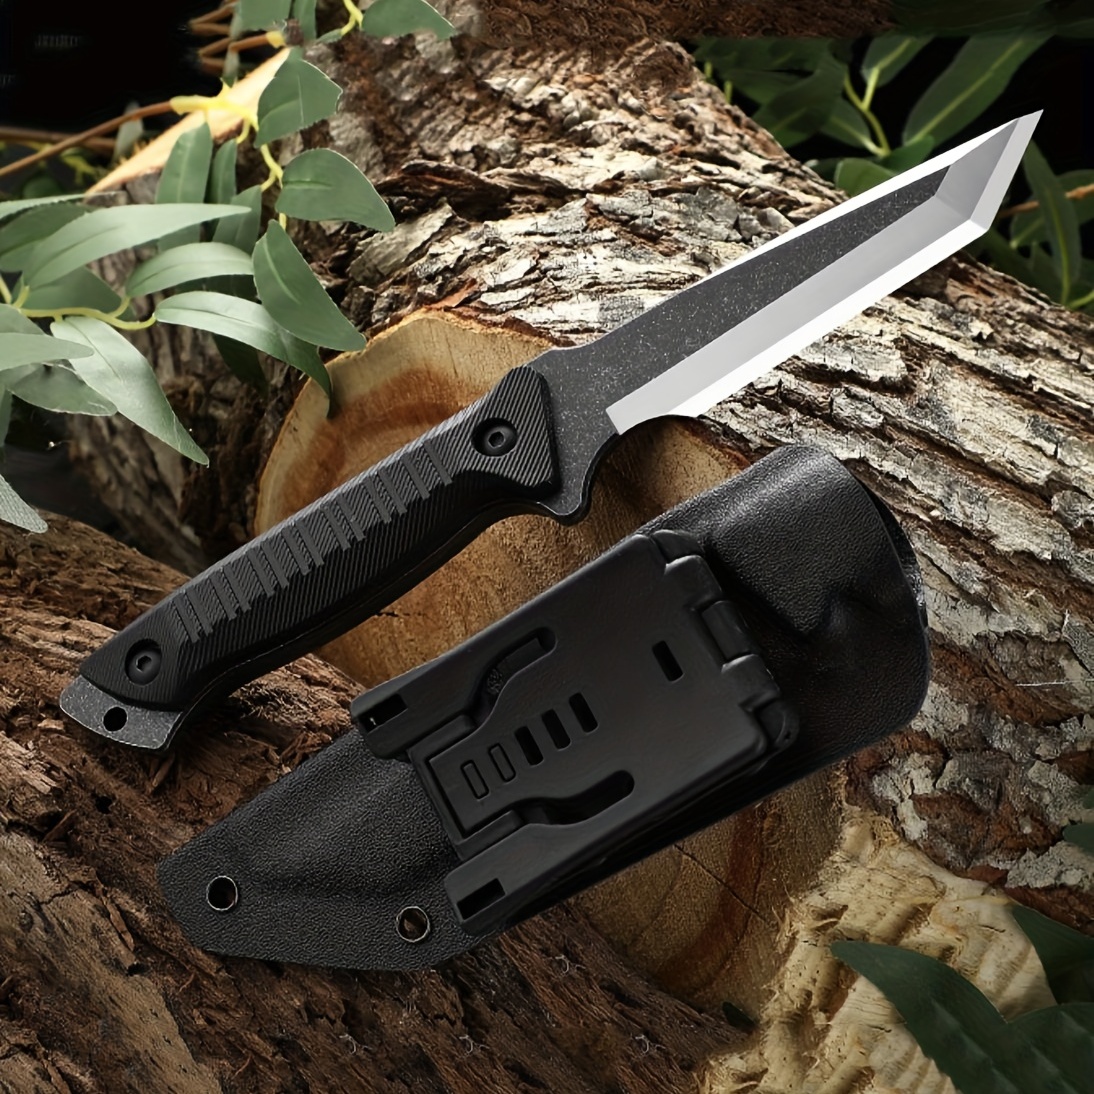  Pocket Knife for Men, Tactical Folding Knives with Clip, Glass  Breaker & Seatbelt Cutter, EDC Survival Knife for Emergency, Cool Pocket  Knives for Outdoor Camping Hunting Fishing : Tools & Home